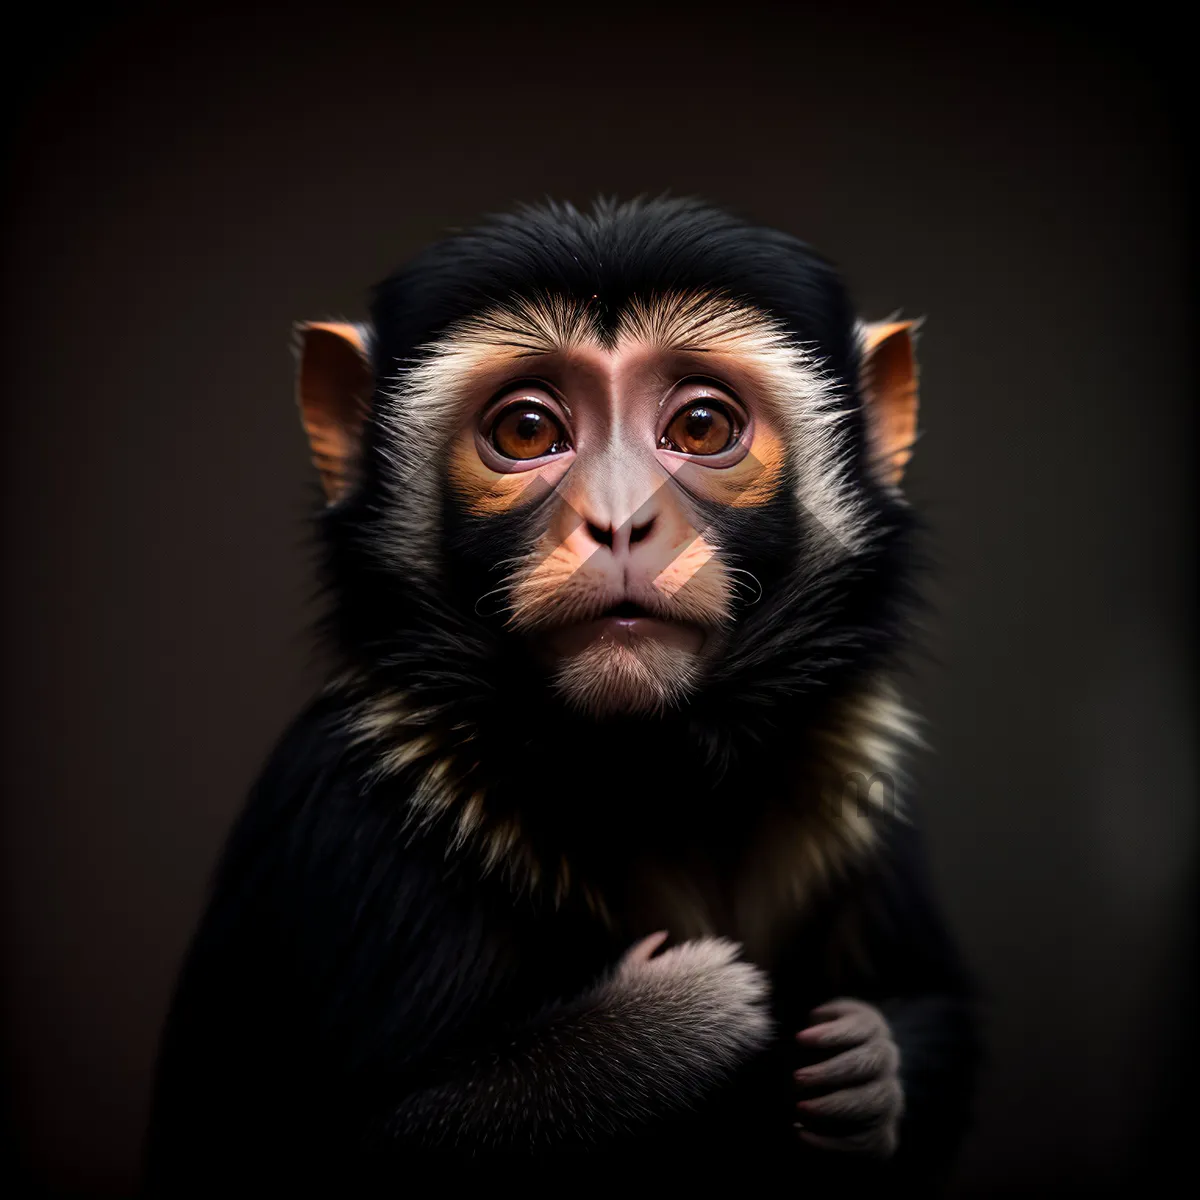 Picture of Cute Baby Monkey Portrait in the Wild